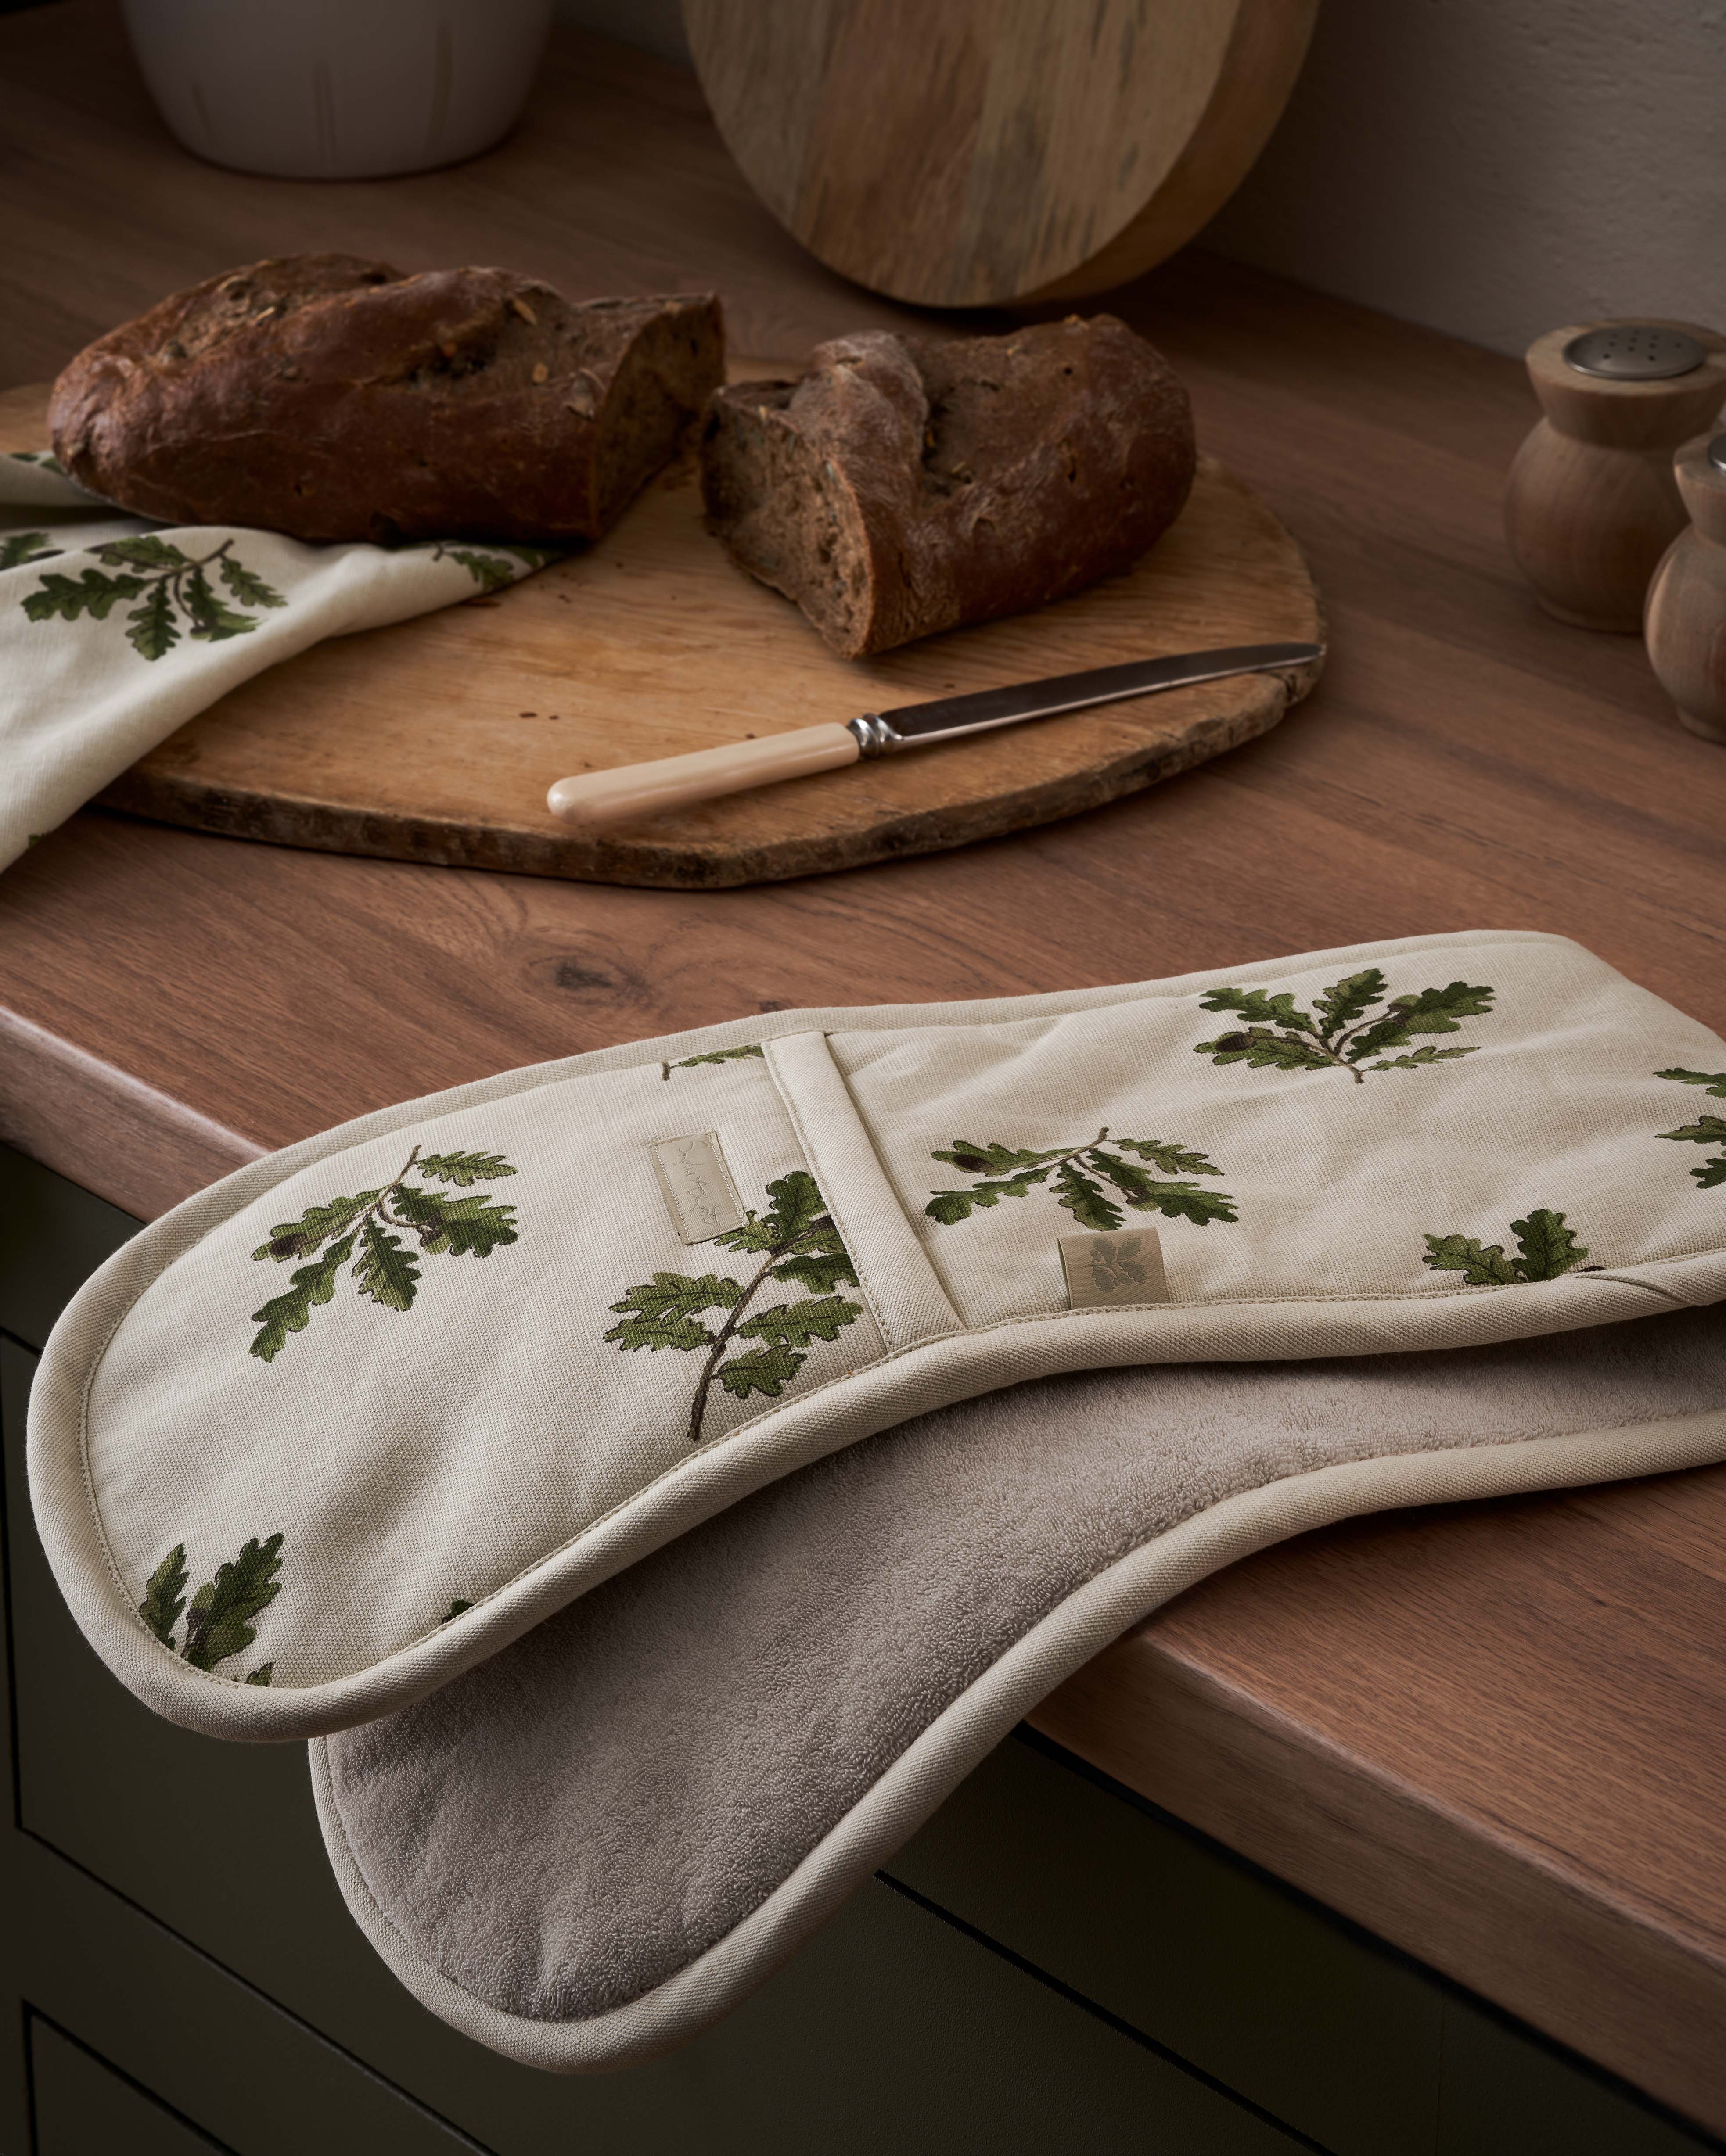 Double oven glove with Acorn & Oak Leaves design